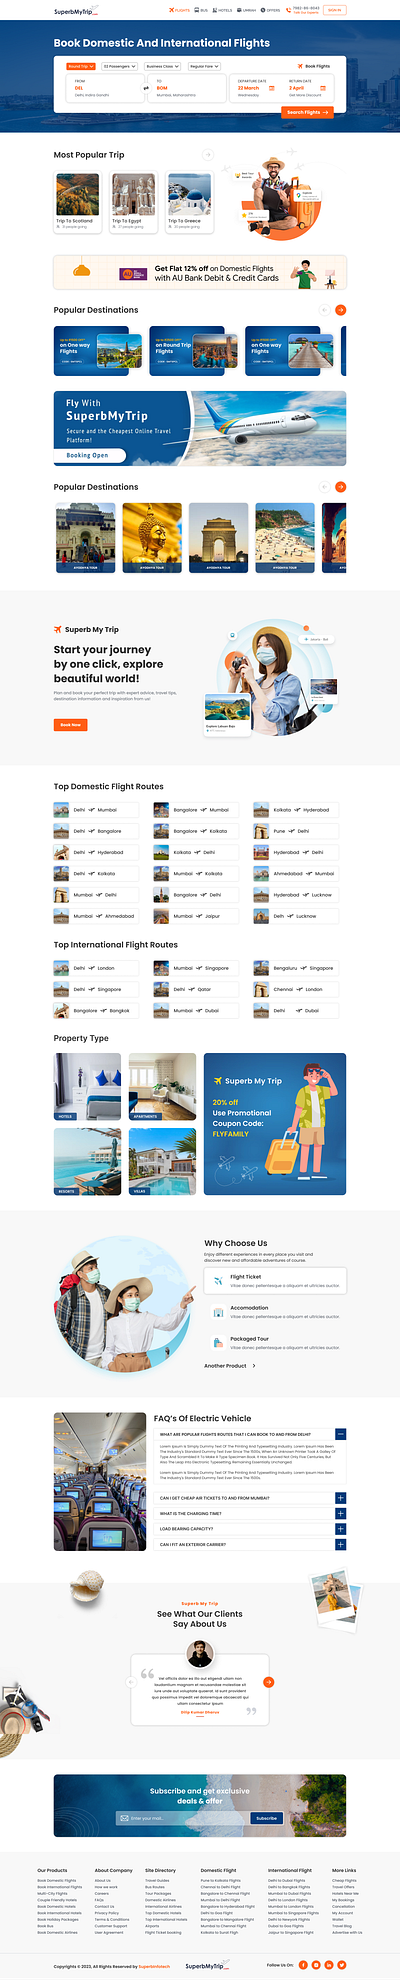 Hotel, Bus, Travel and Flights Booking Website UI Design book now cab flight flight book hotel tour travel ui website website ui design